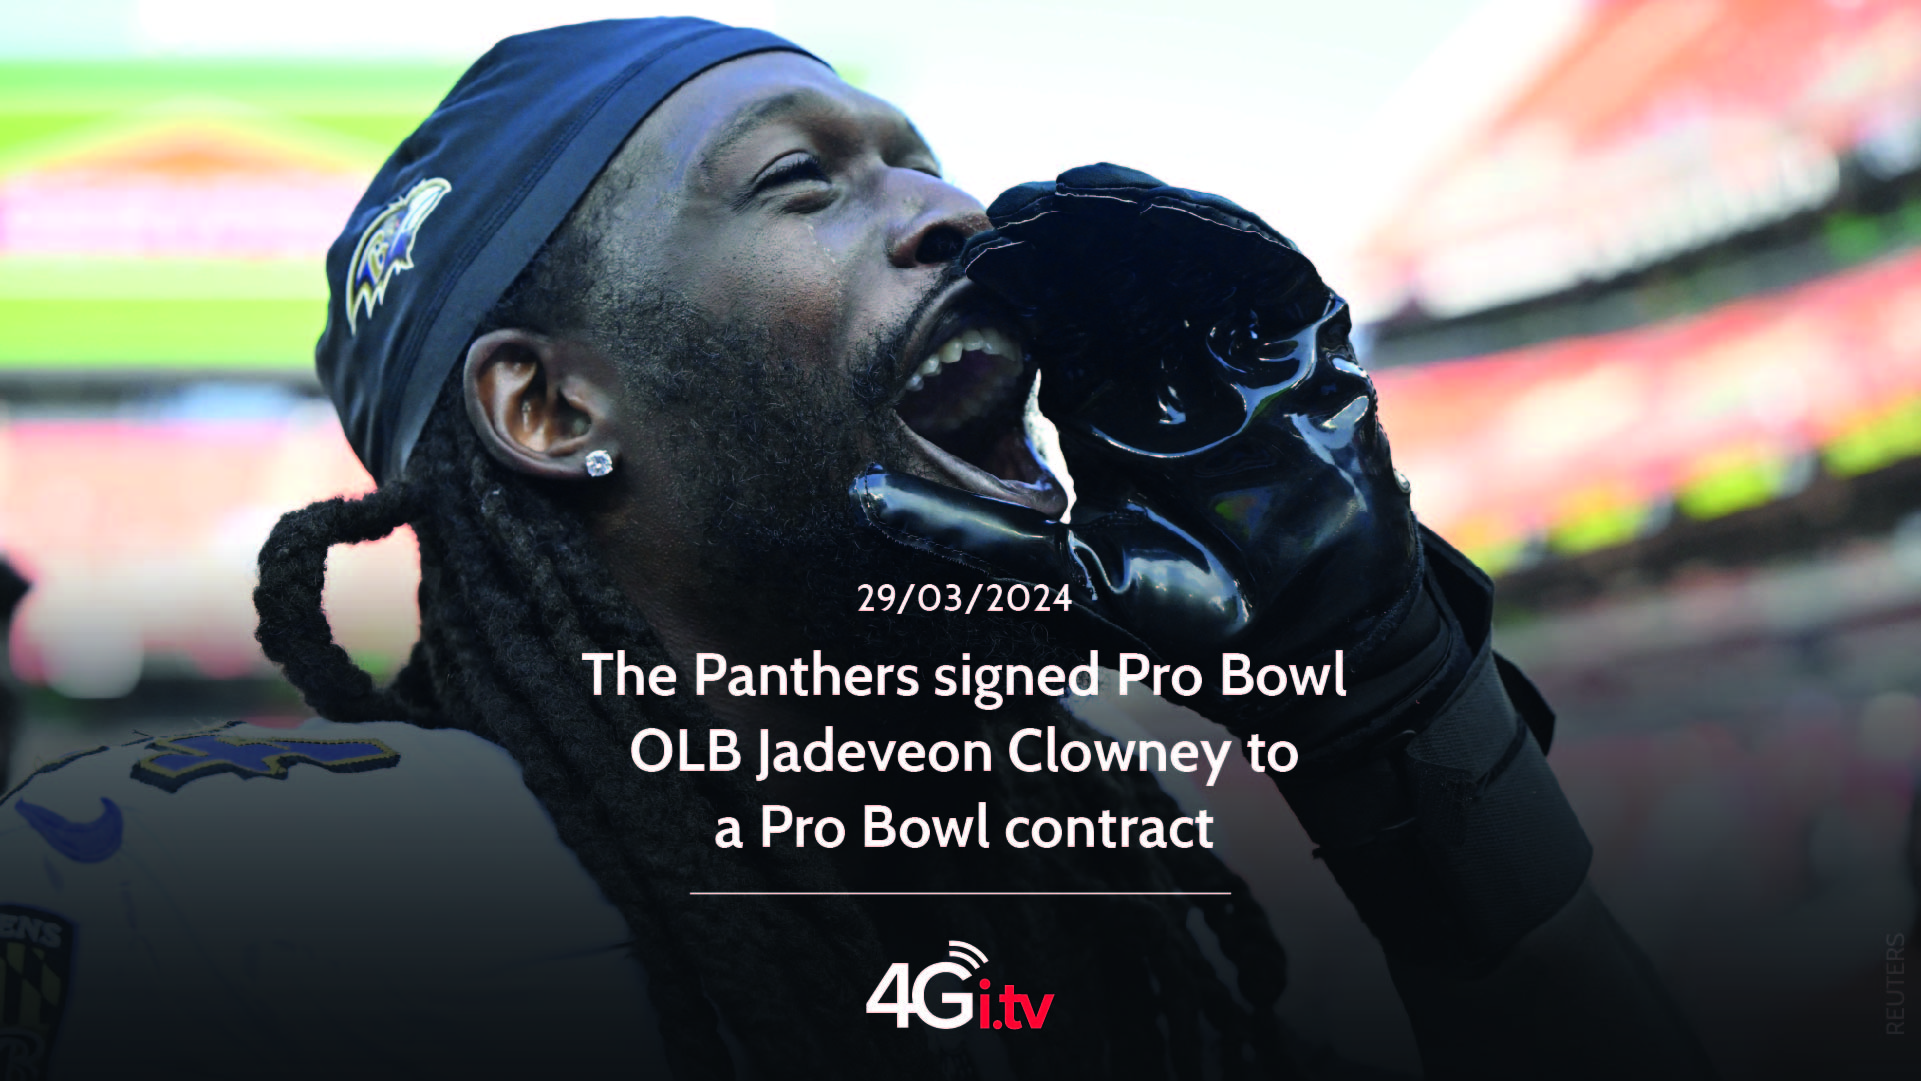 Lesen Sie mehr über den Artikel The Panthers signed Pro Bowl OLB Jadeveon Clowney to a Pro Bowl contract